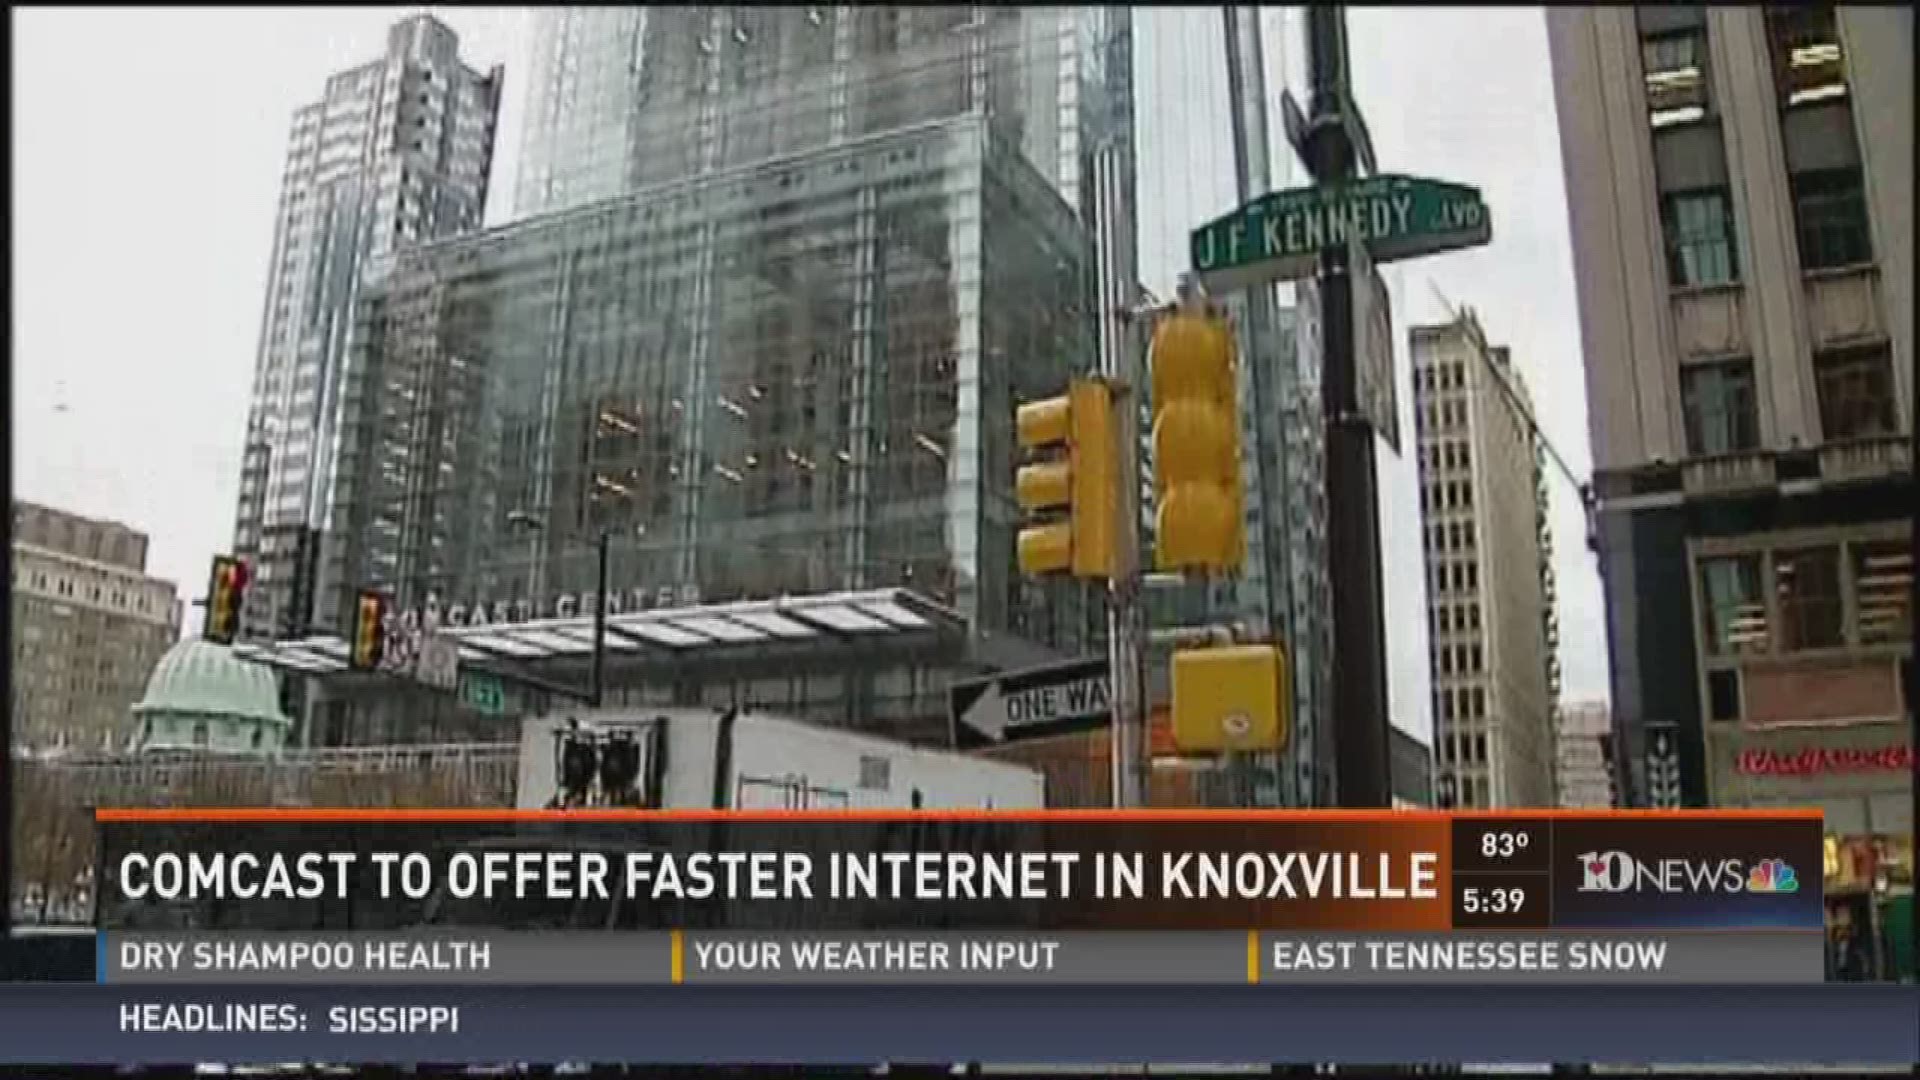 Nov. 1, 2016: Comcast says its Gigabit internet service will be available in Knoxville in early 2017.